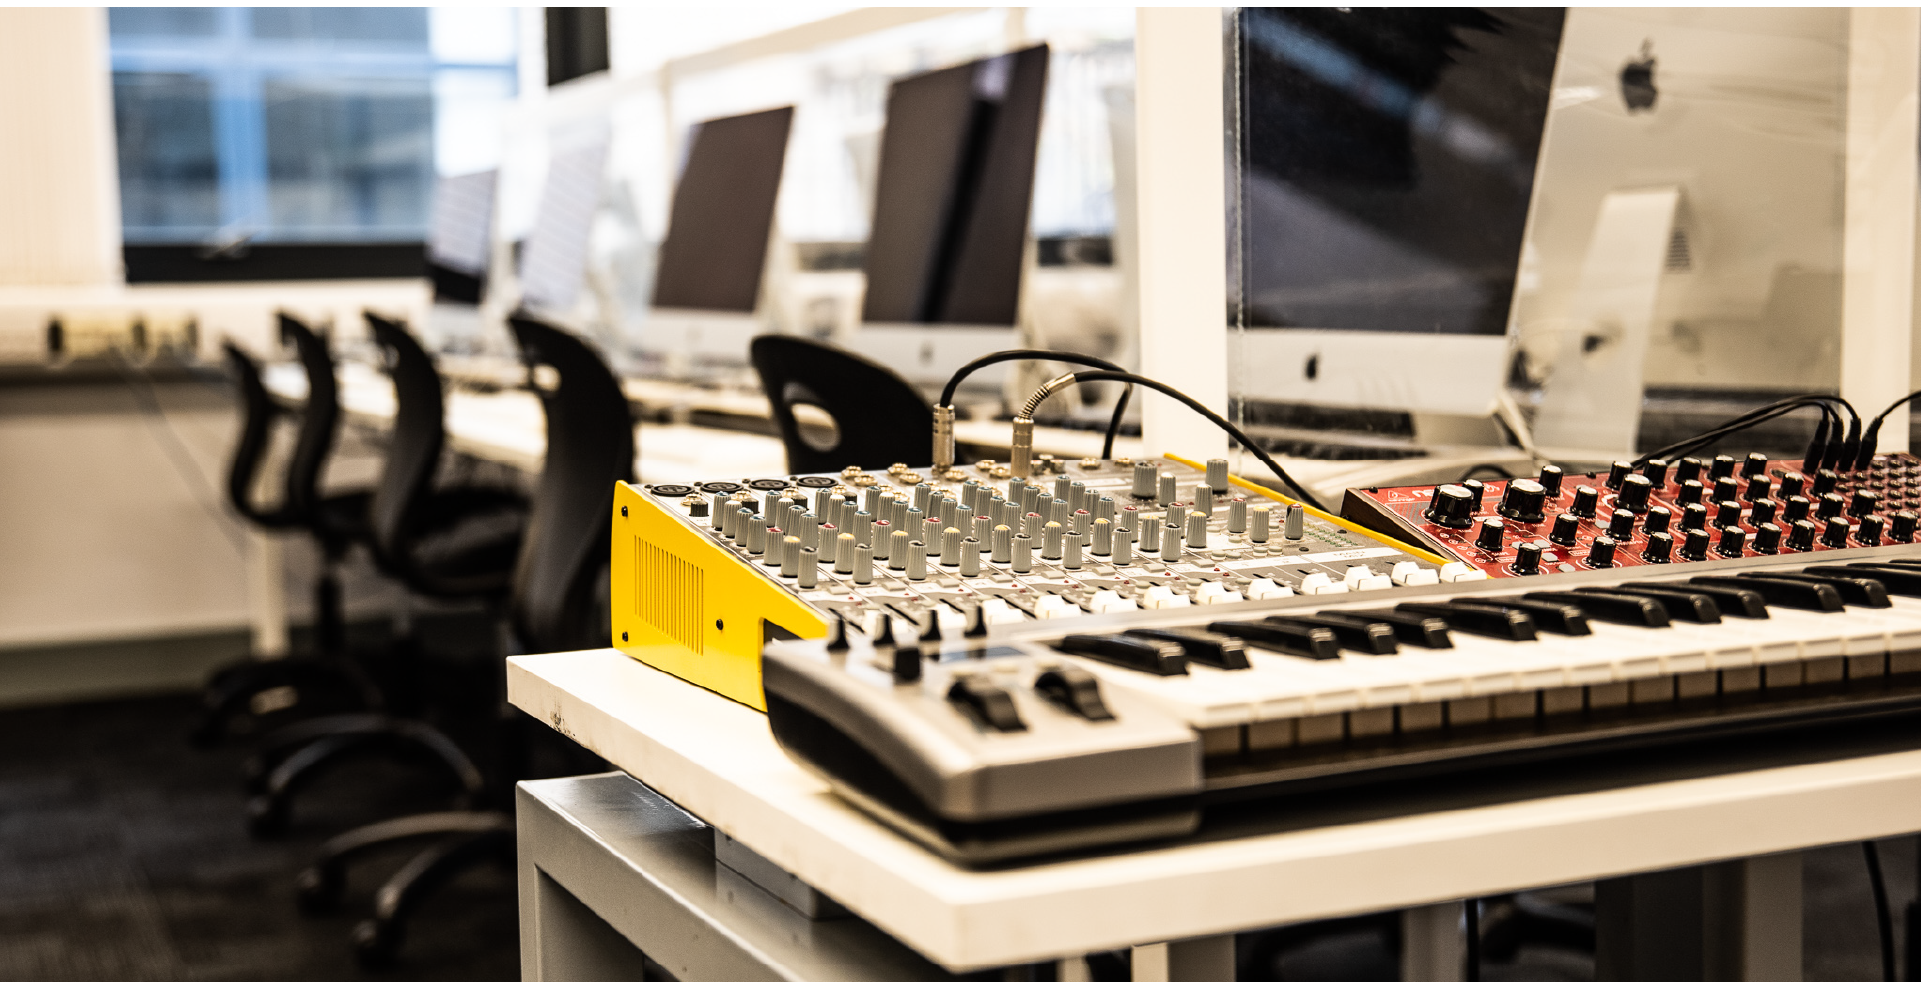 Image of computers, mixing consoles and MIDI keyboards in a classroom